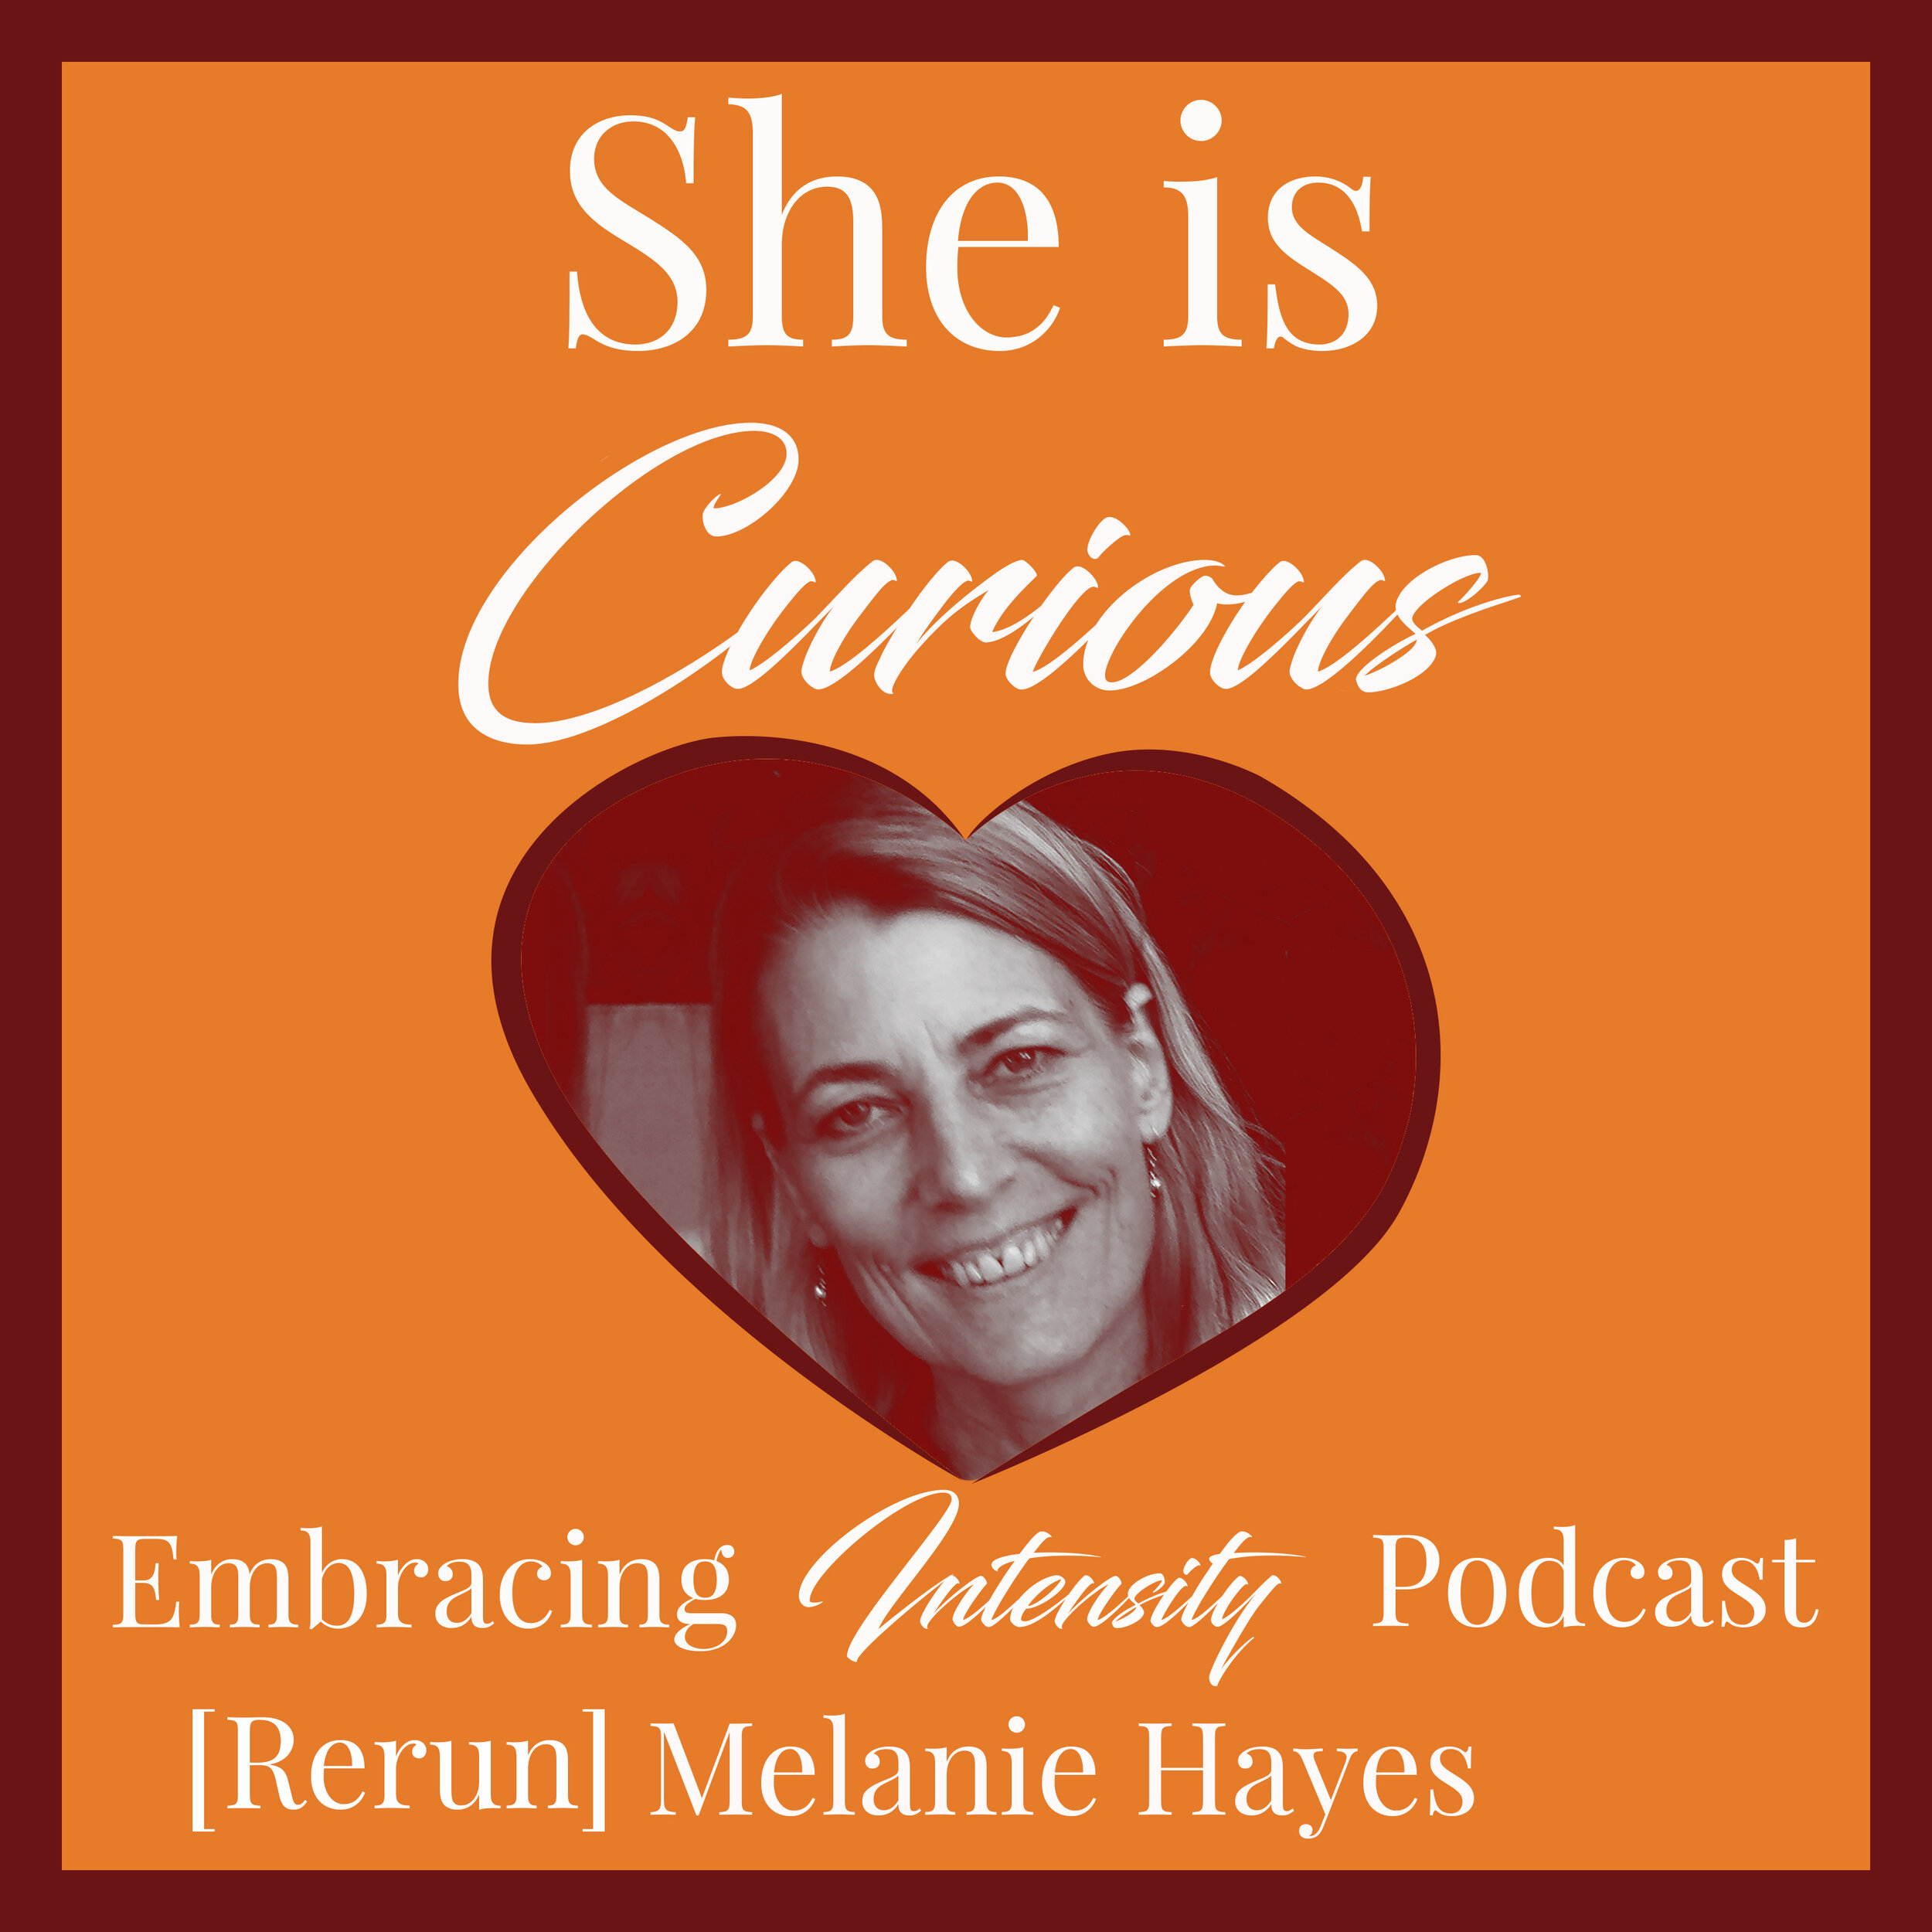 Twice Exceptional - Thriving with Your Unique Gifts with Dr. Melanie Hayes